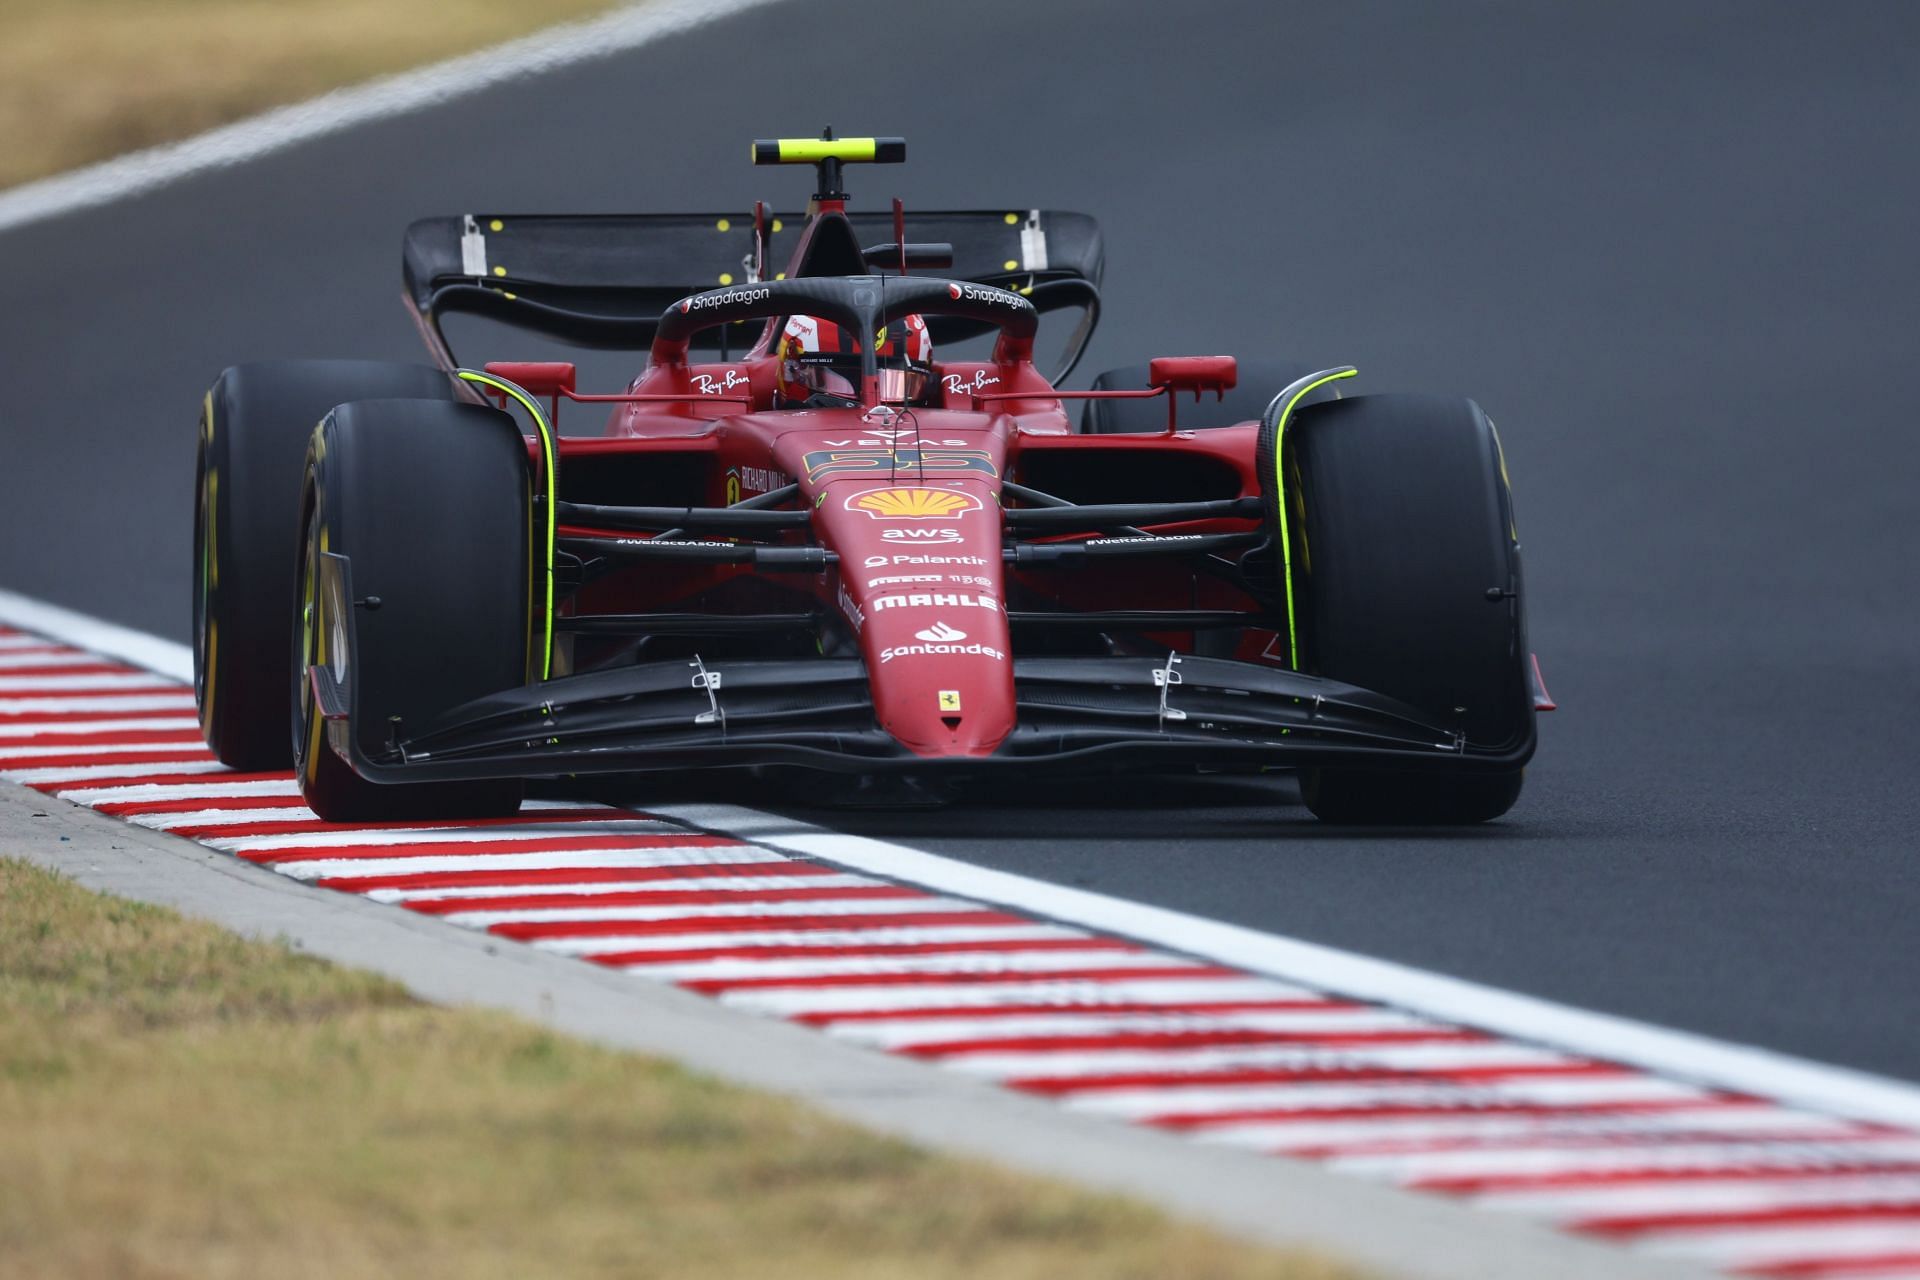 Ferrari will be eyeing a win at Spa